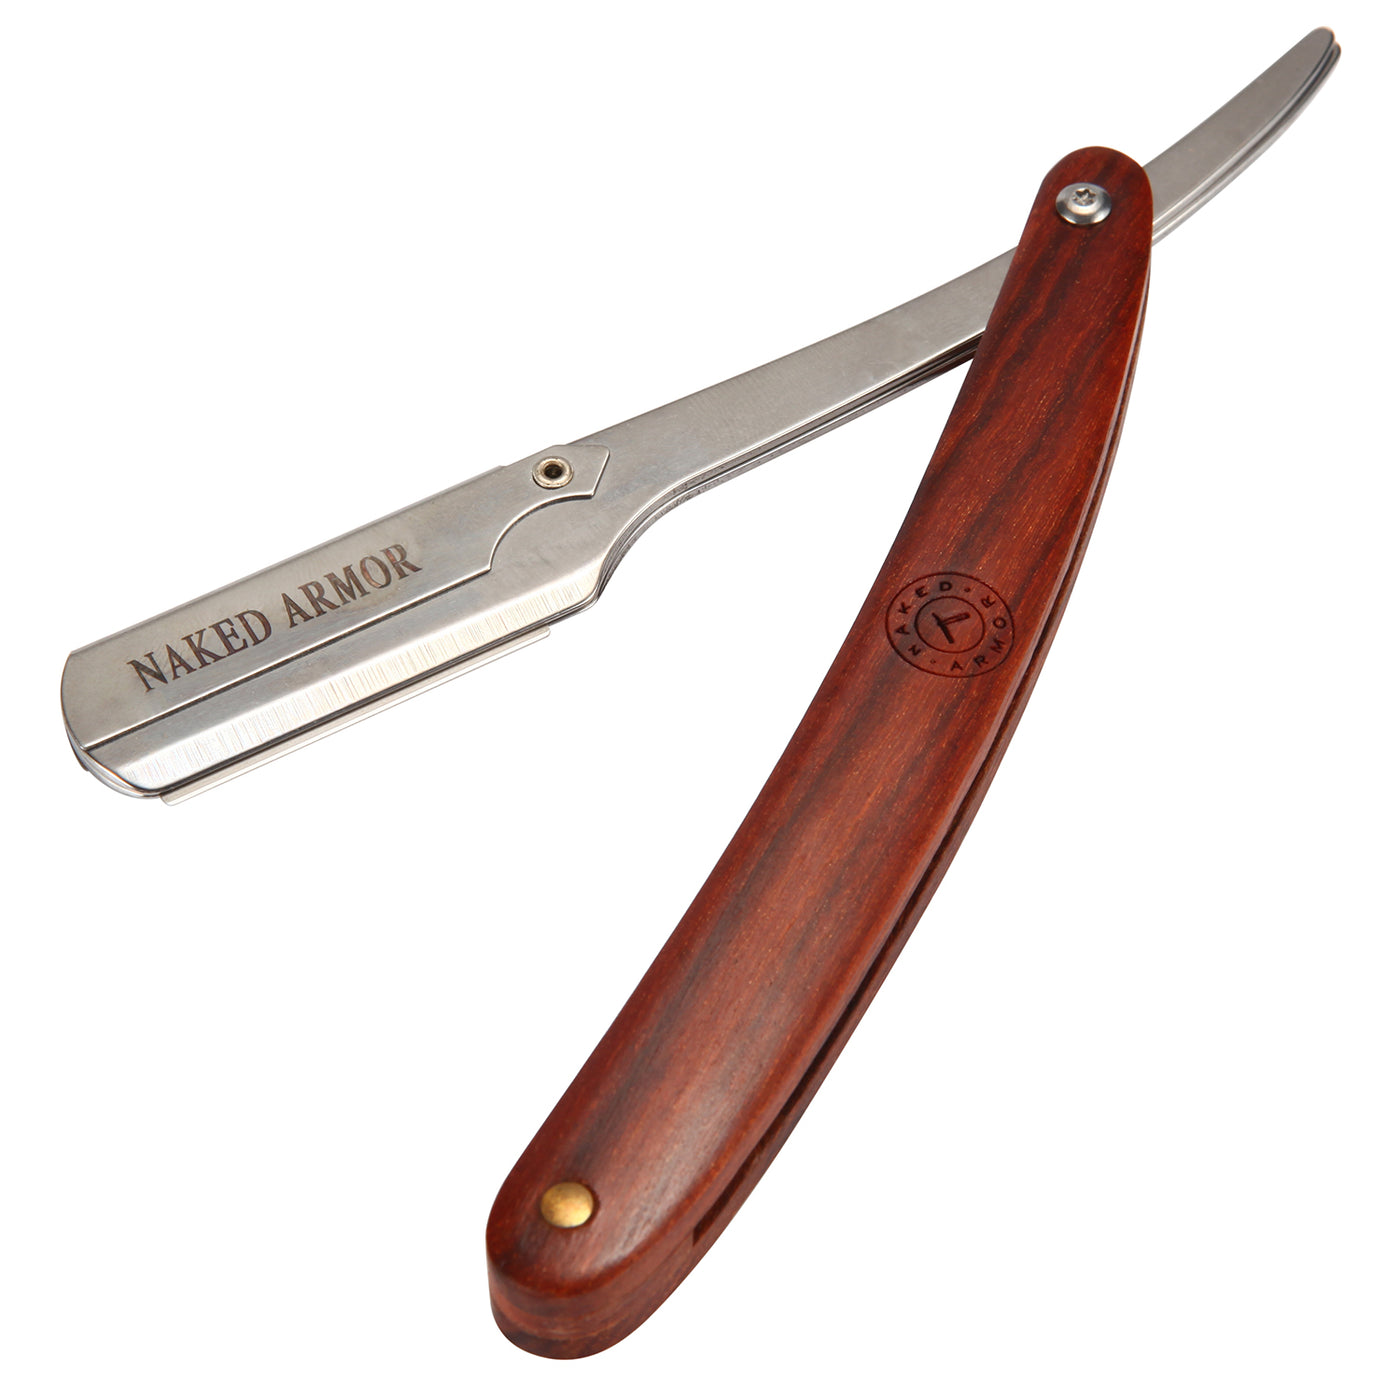  Hector Shavette Straight Razor by Naked Armor sold by Naked Armor Razors